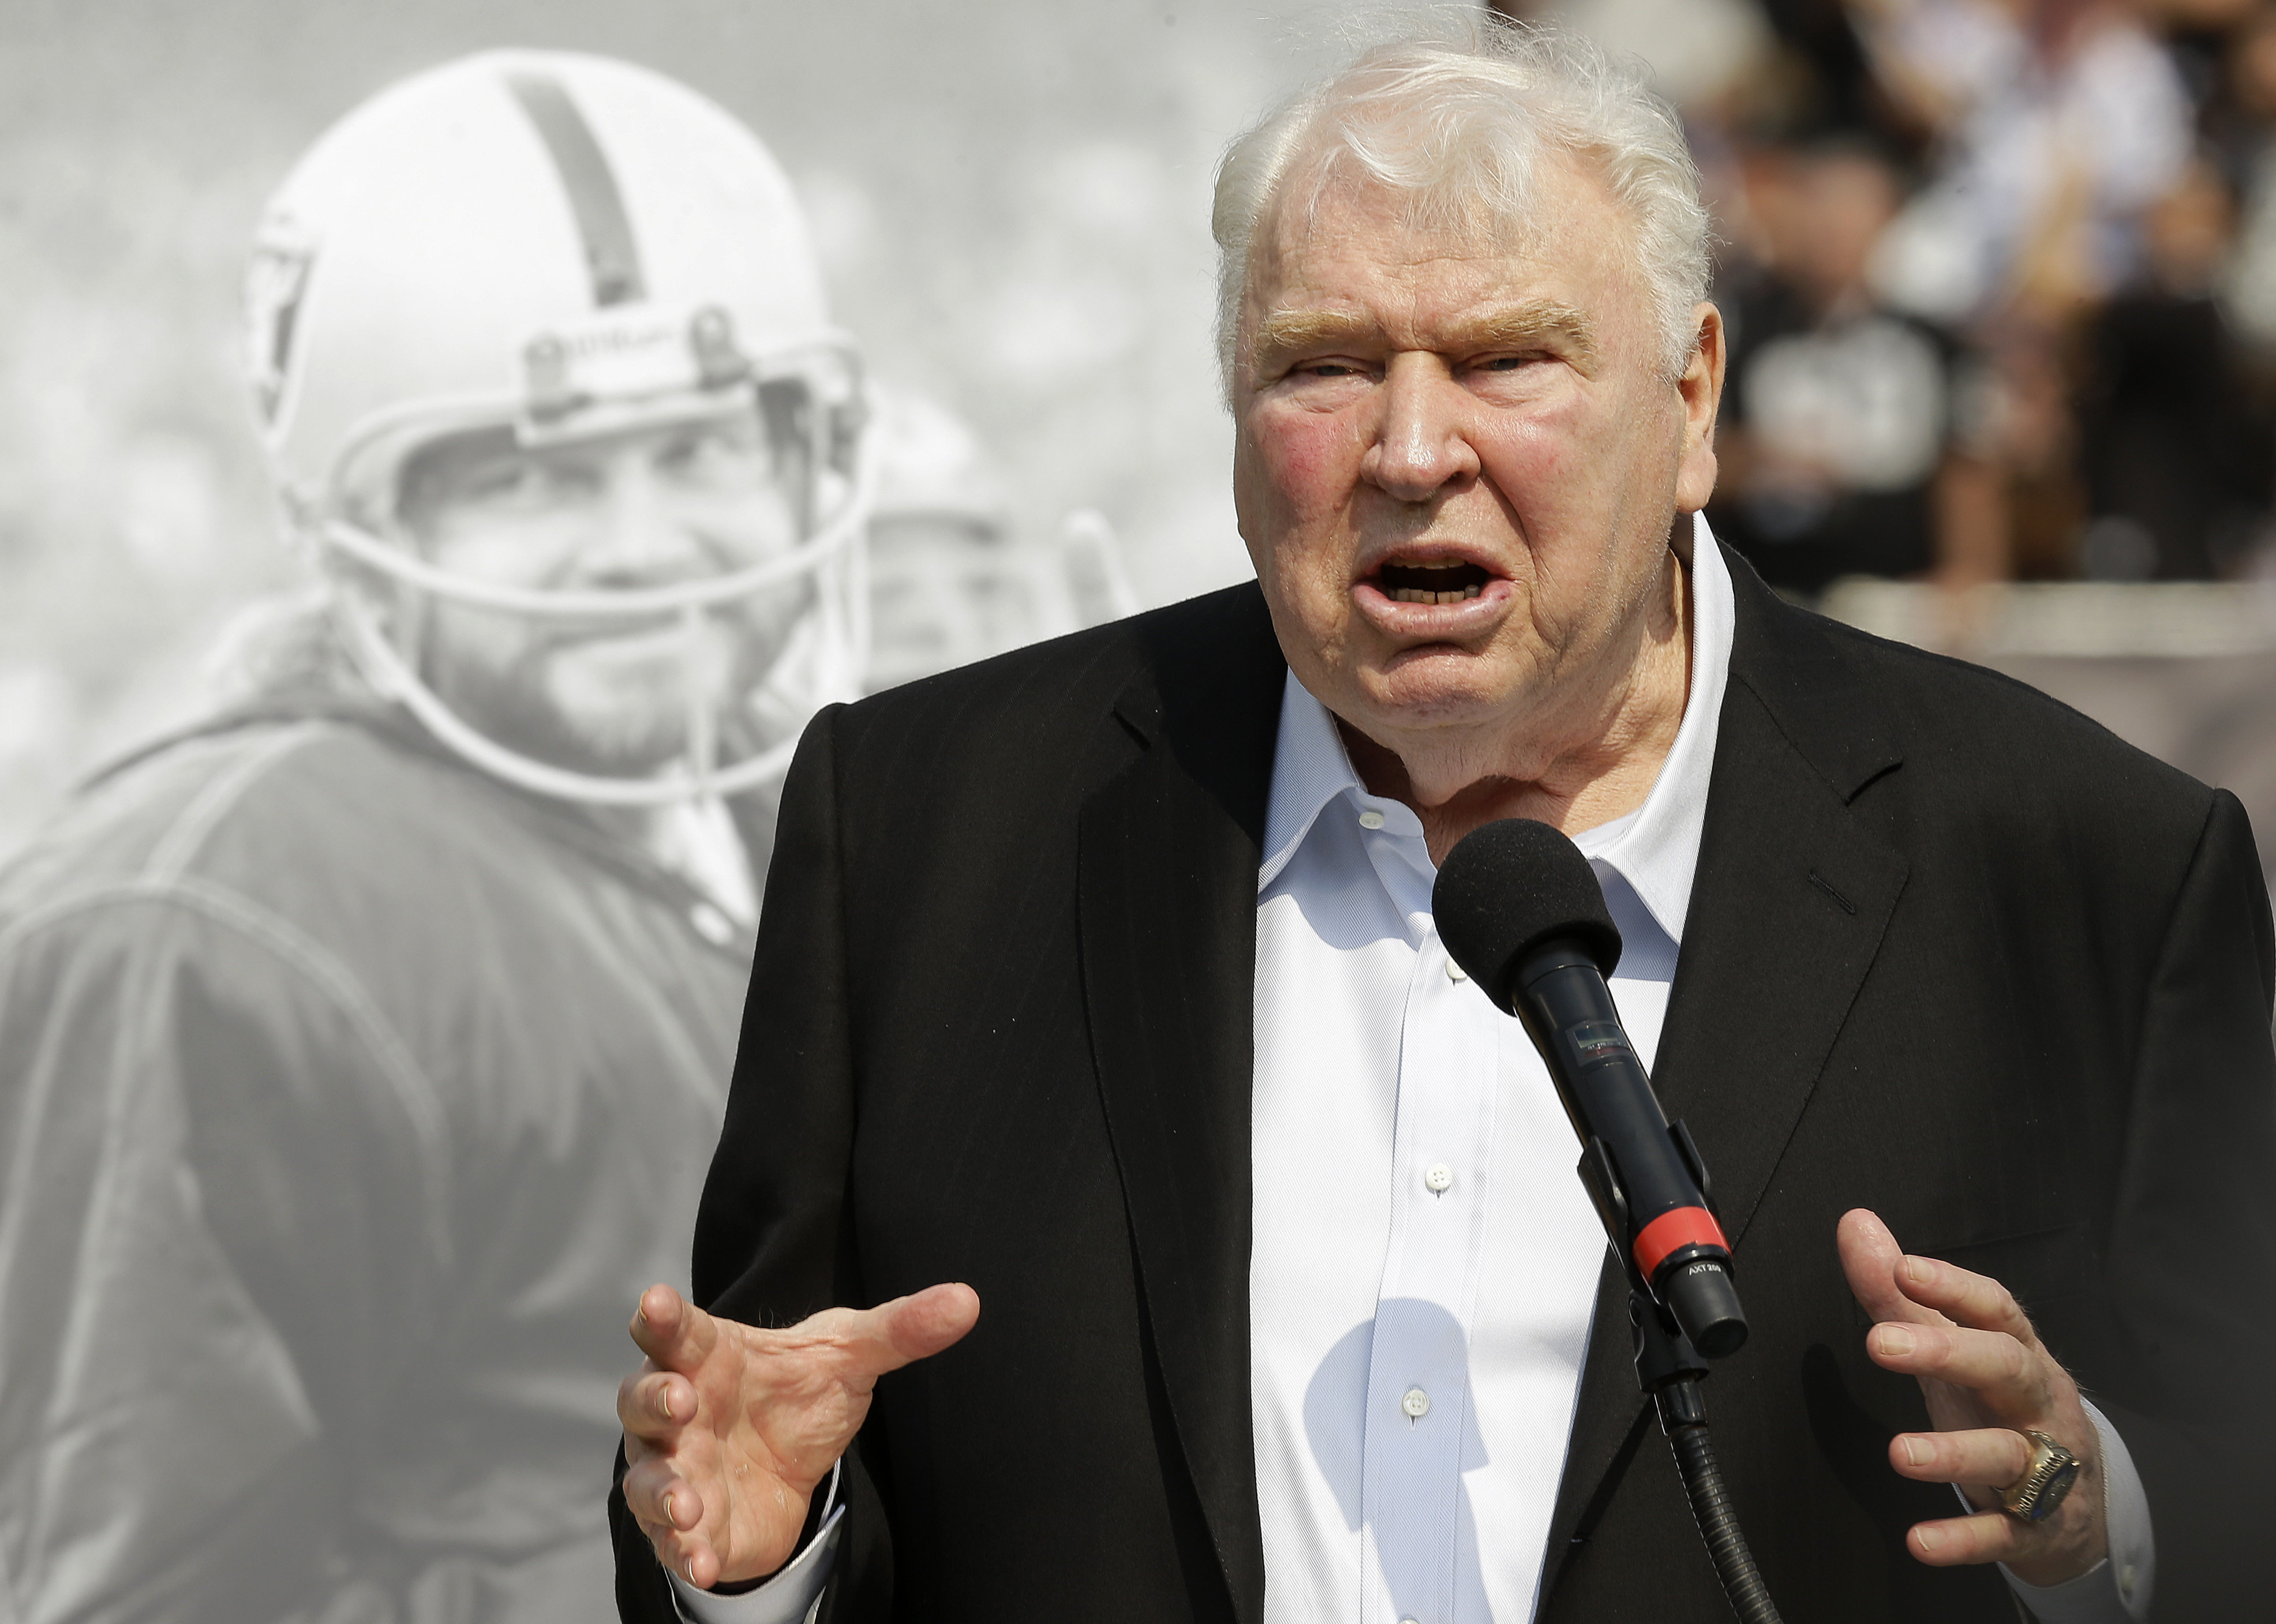 NFL great John Madden has died at the age of 85. Photo: AP